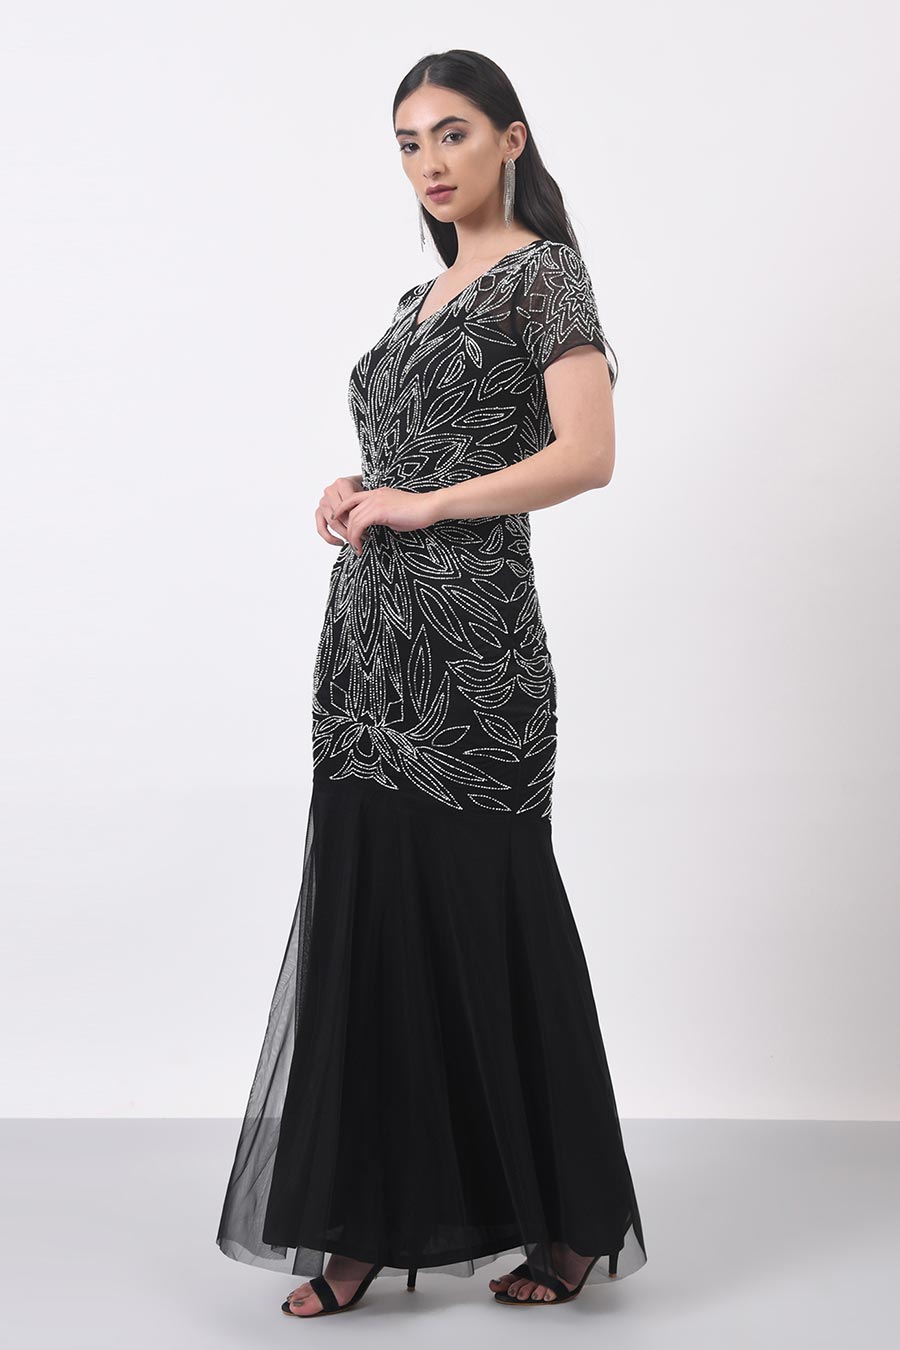 Black Embroidered Gown Dress